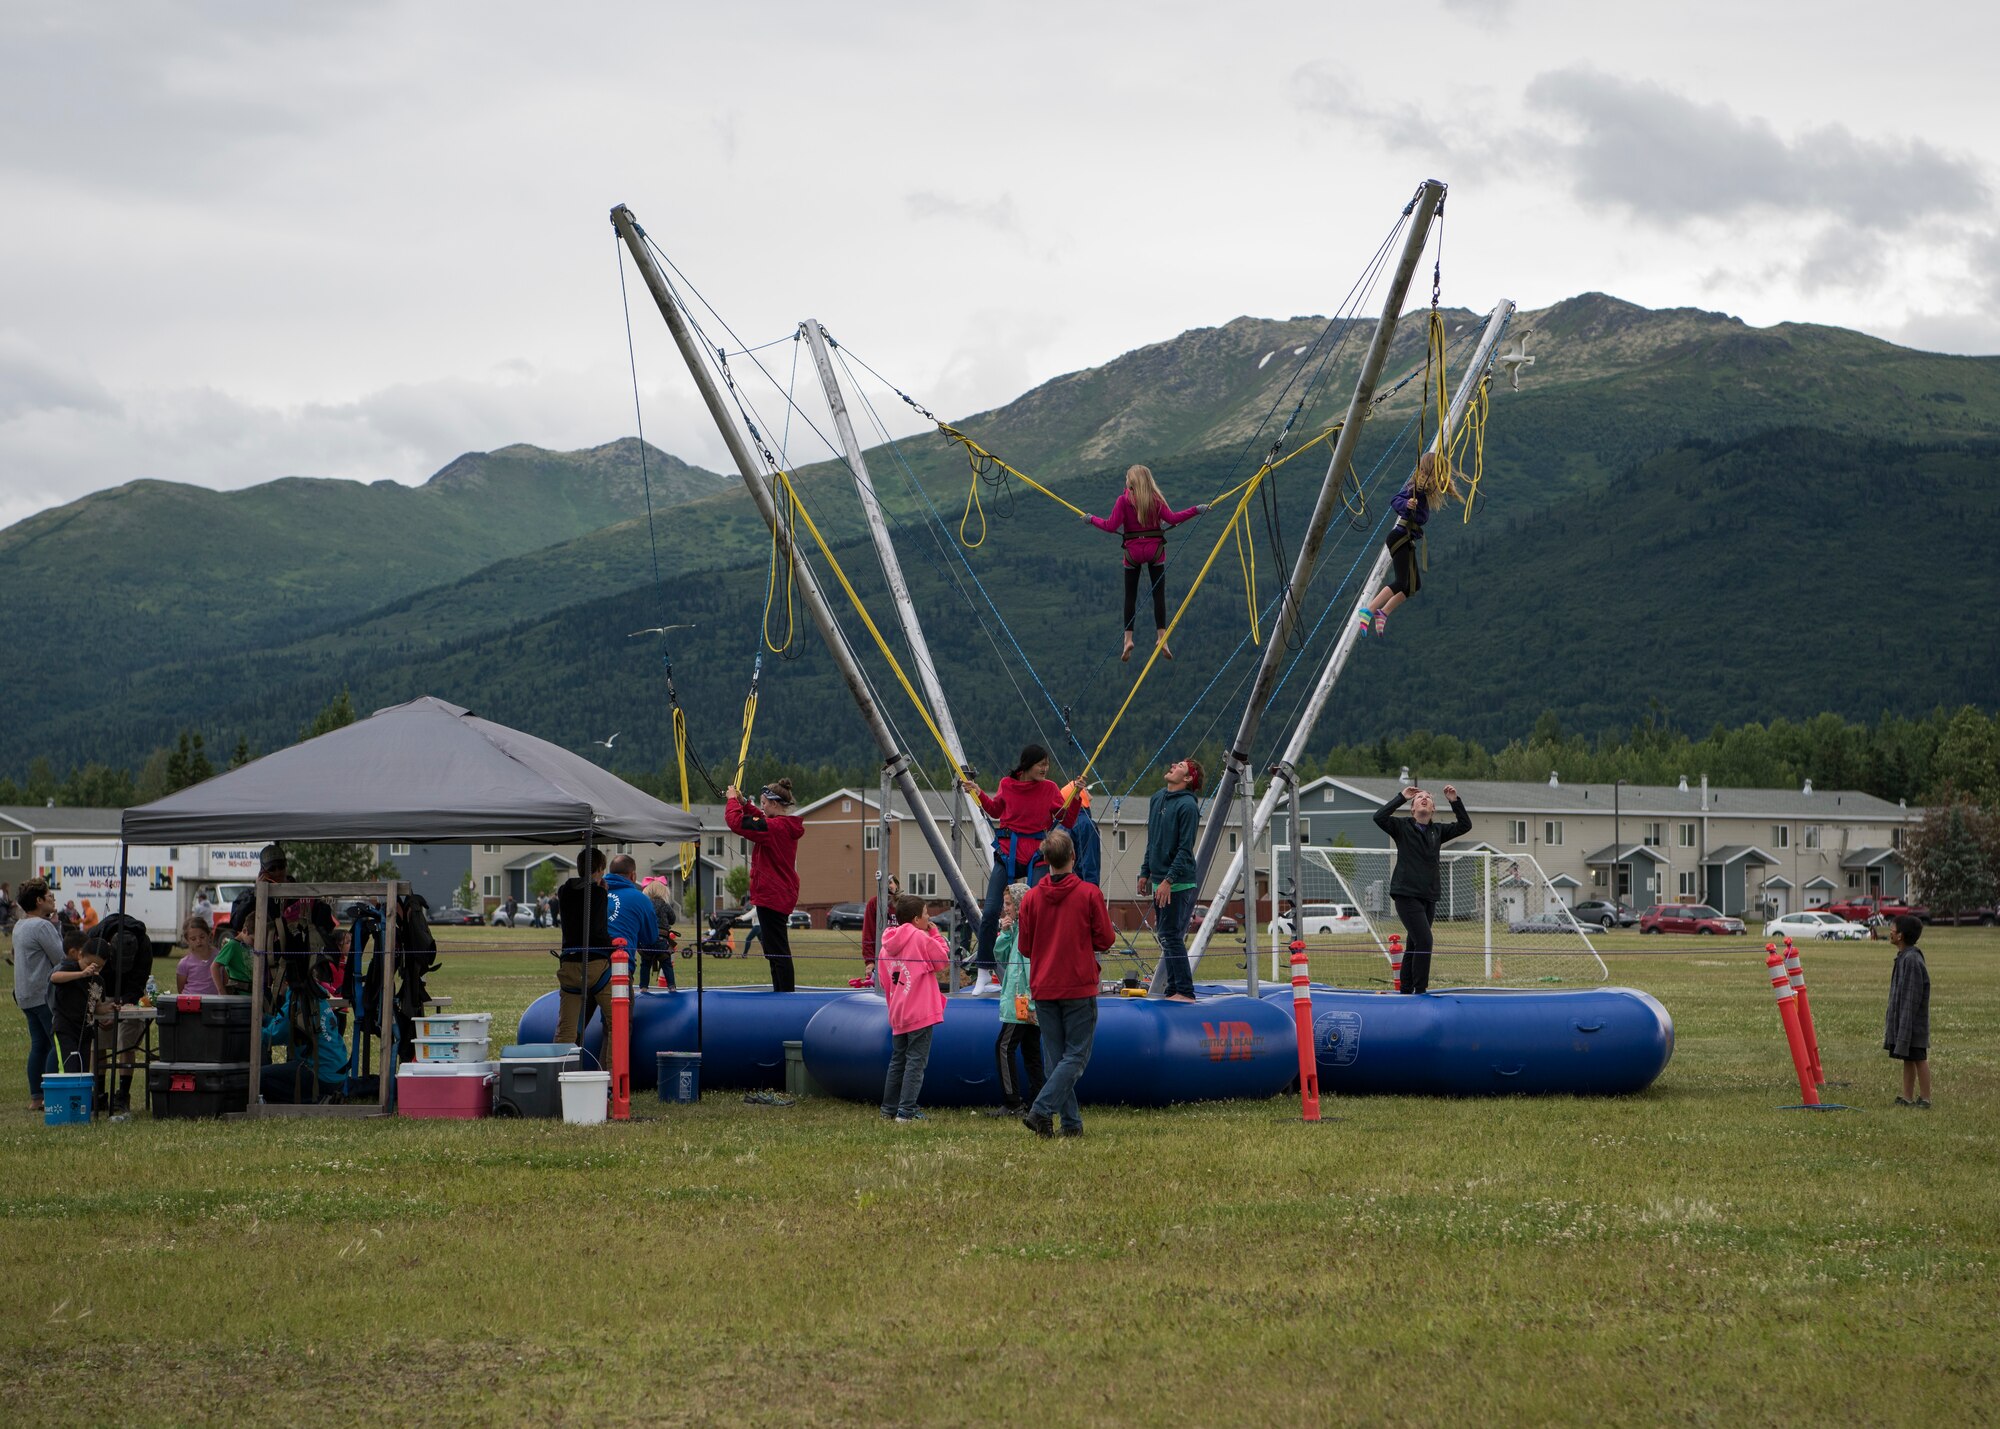 Children bounce on the bungee trampolines during the 3rd annual Summer Fest hosted by the 673d Force Support Squadron at Joint Base Elmendorf-Richardson, Alaska, July 8, 2018. The event was open to anyone with base access and offered free activities such as carnival rides, a petting zoo, face painting, a bungee trampoline, and carnival games.